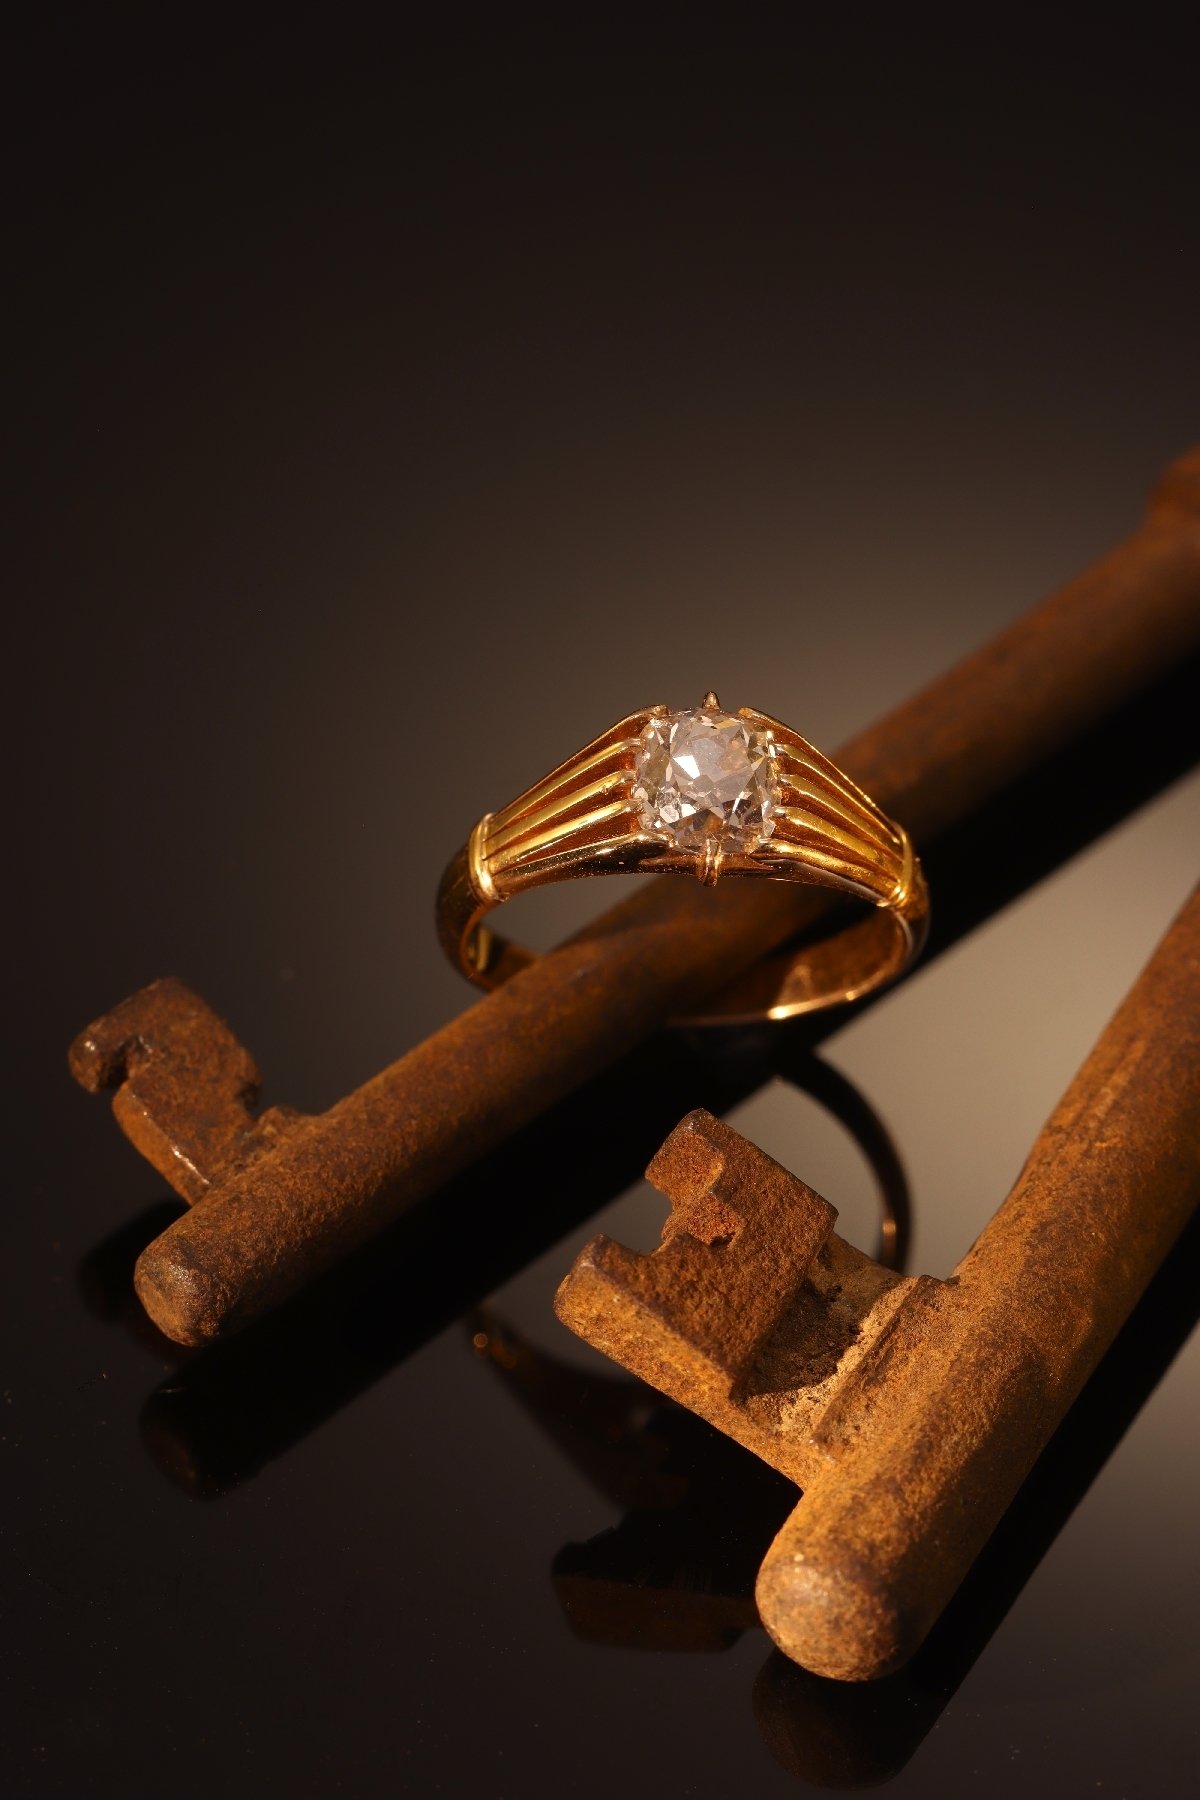 Click the picture to get to see this Victorian antique diamond ring with big cushion cut old mine cut diamond.